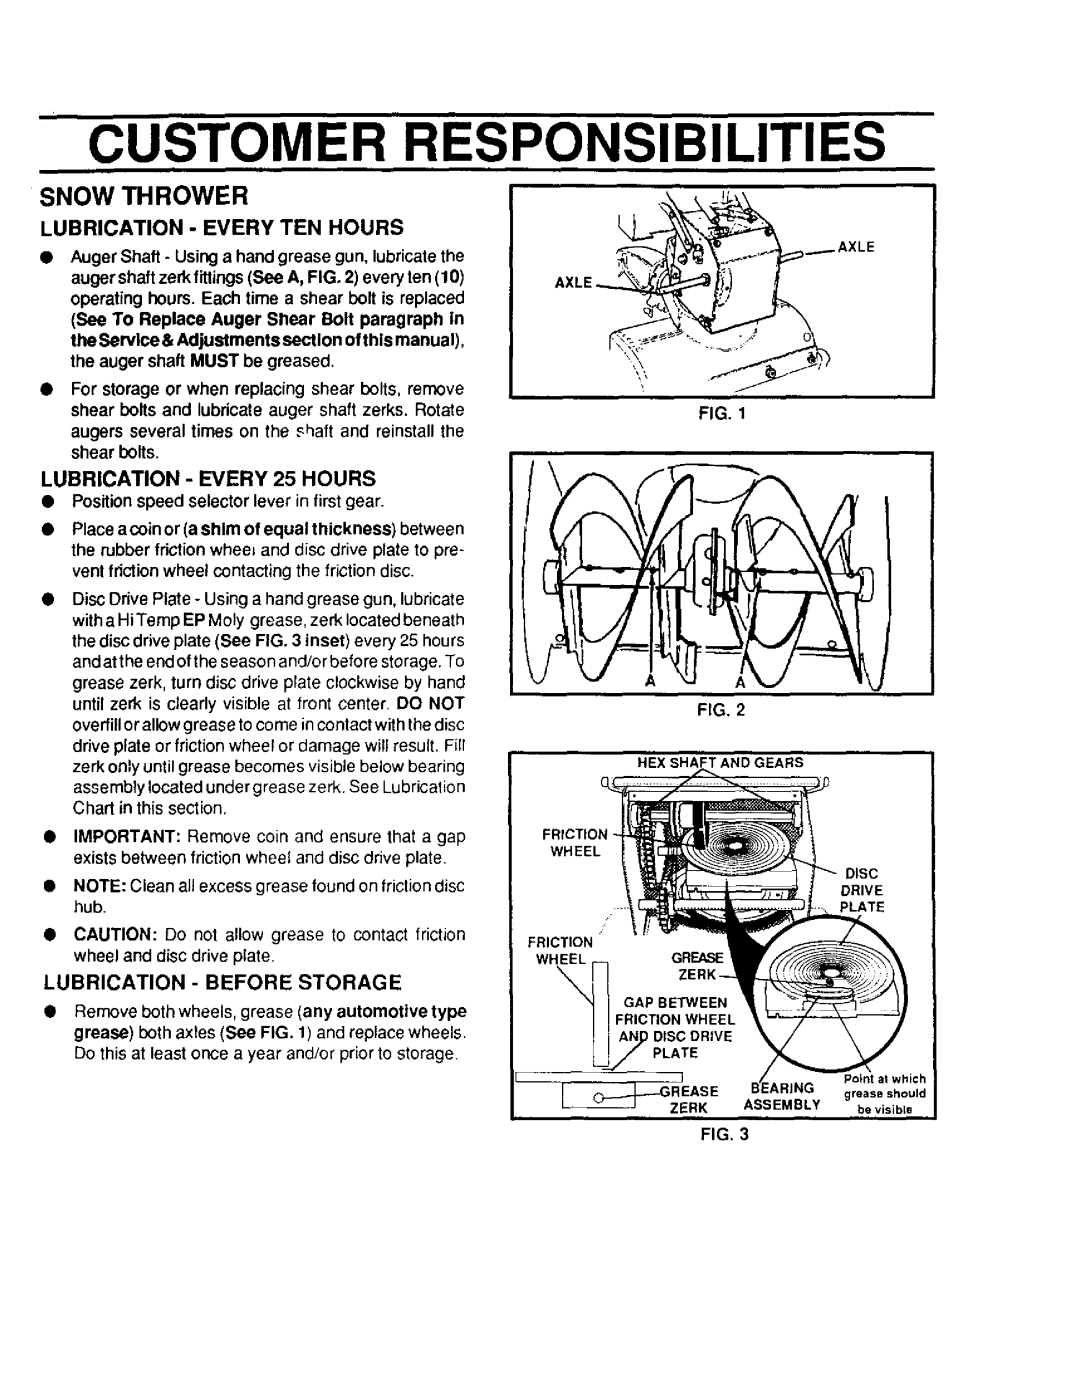 Sears 536.886331 owner manual Snow Thrower, Lubrication - Every Ten Hours, Customer Responsibilities 